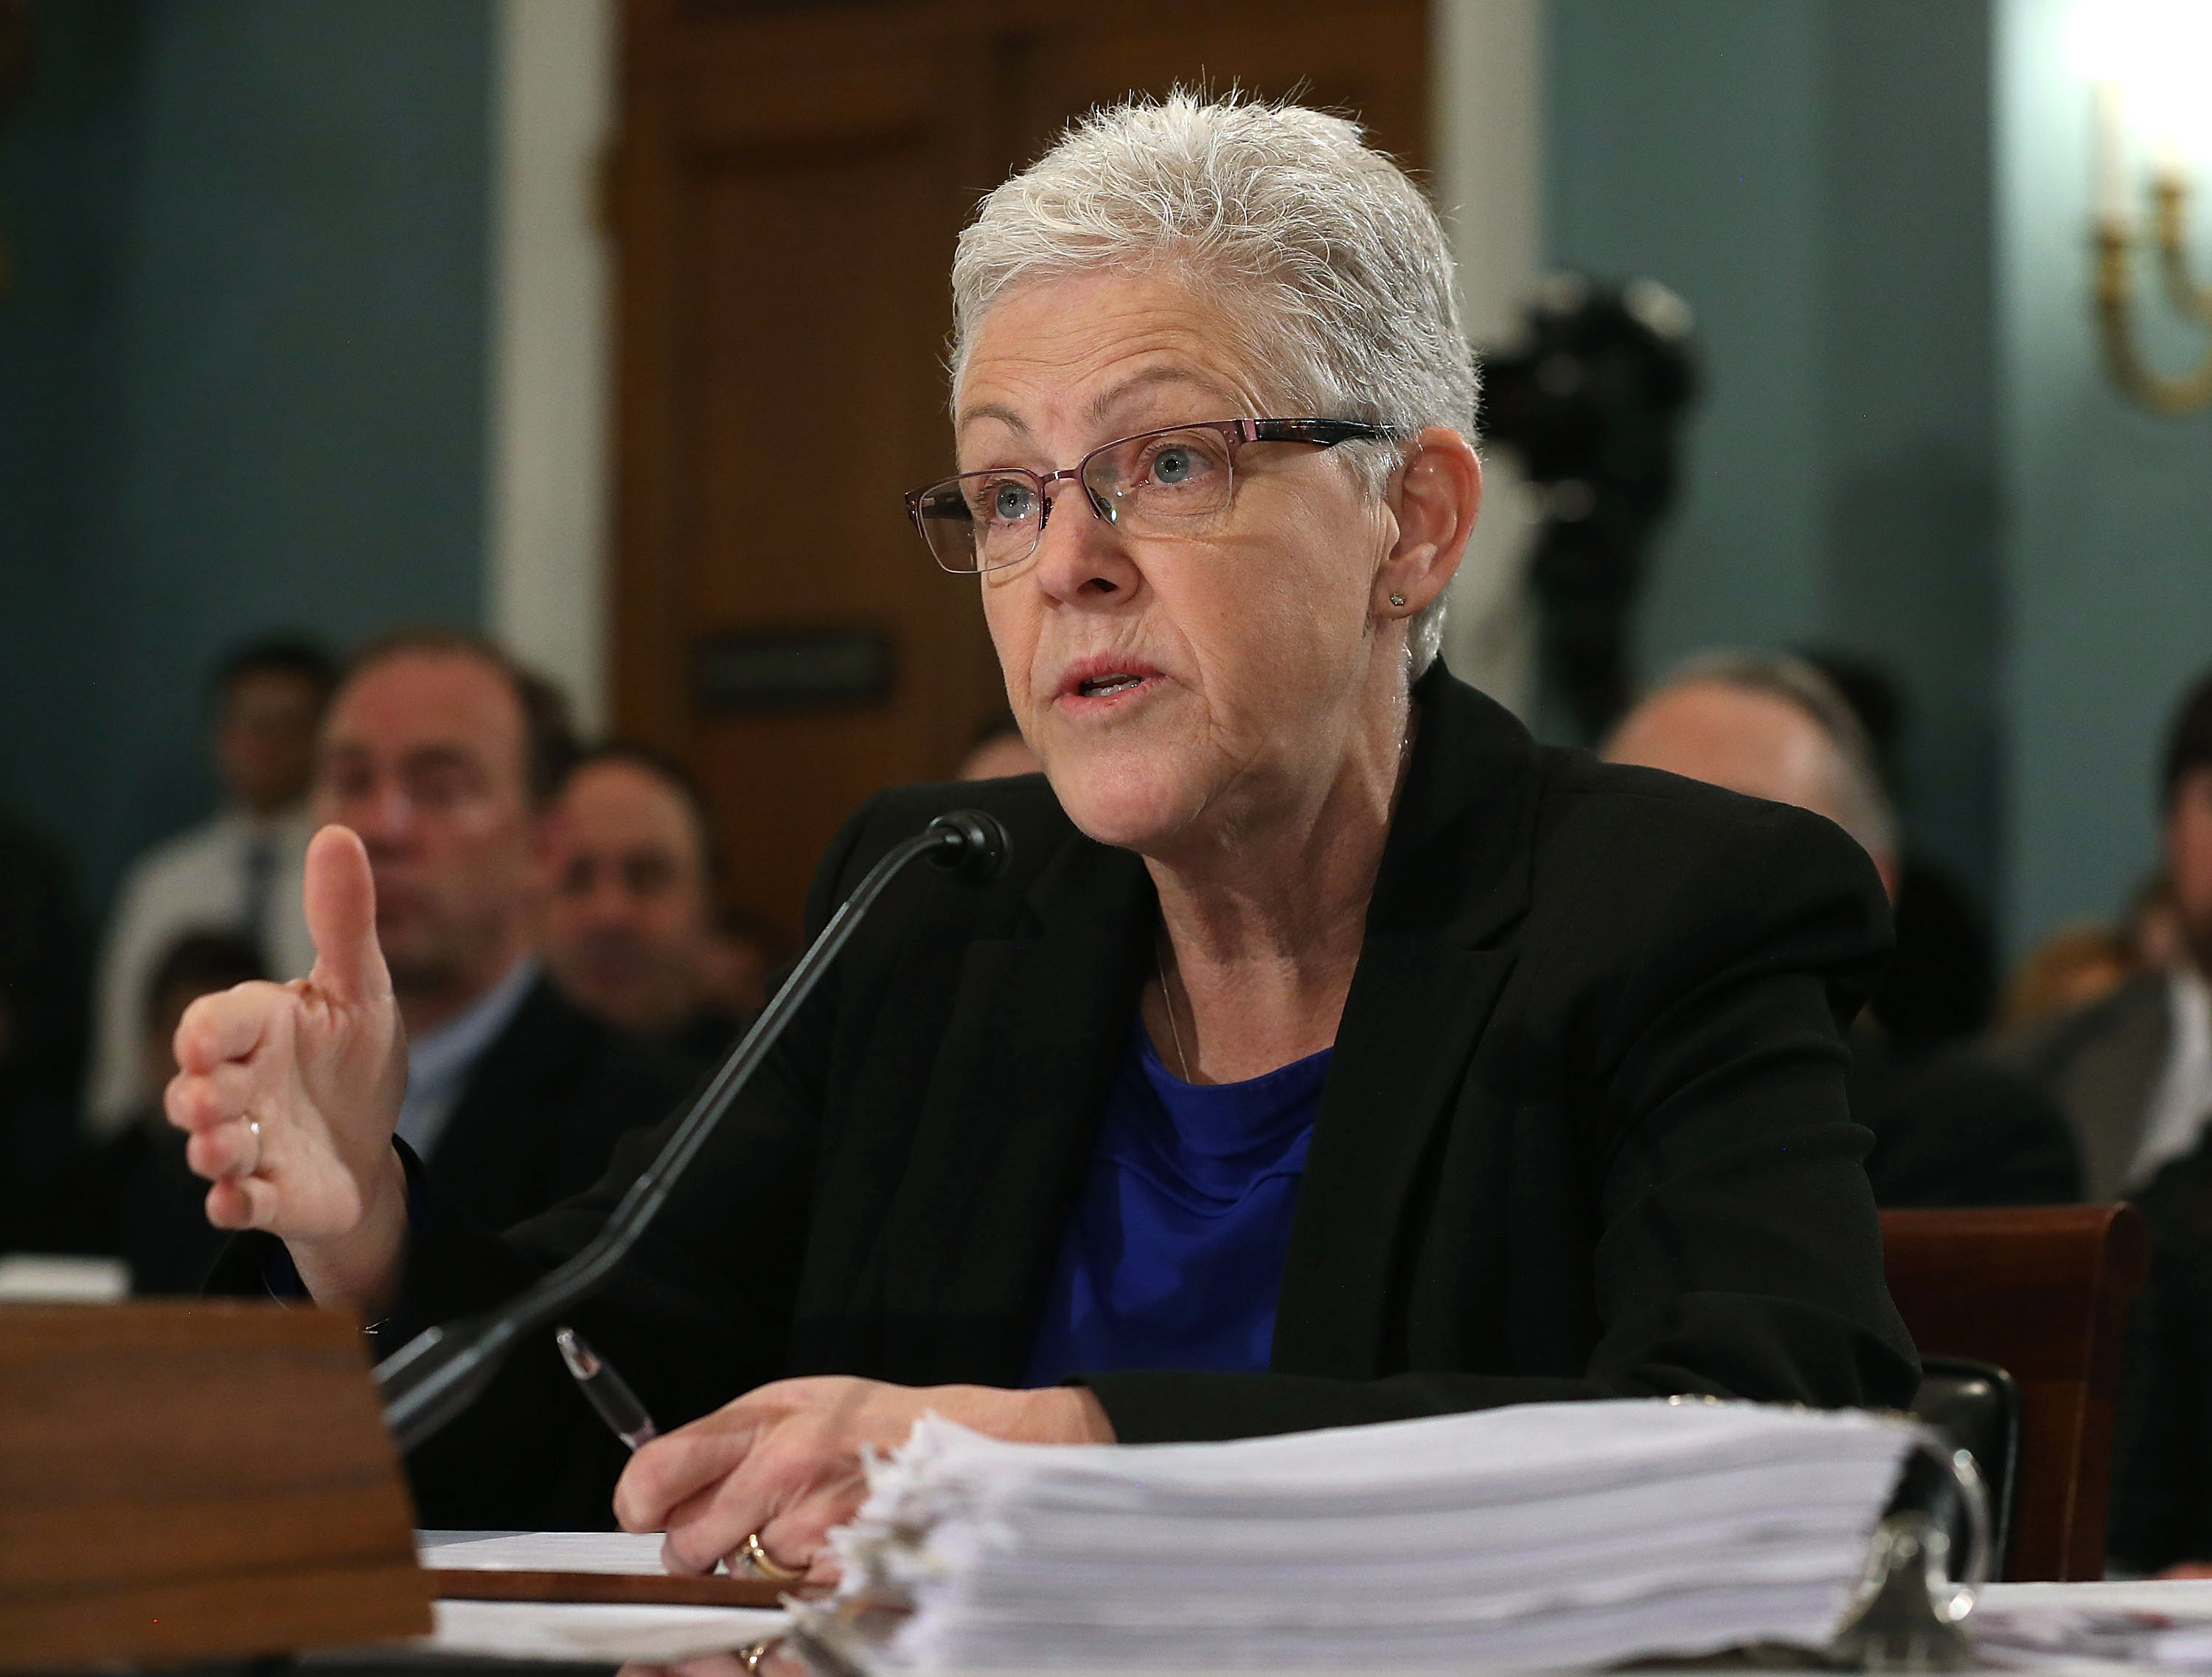 EPA Administrator Gina McCarthy testifies during a House Agriculture Committee hearing on Capitol Hill in Washington, DC. on Feb. 11, 2016. (Mark Wilson—Getty Images)